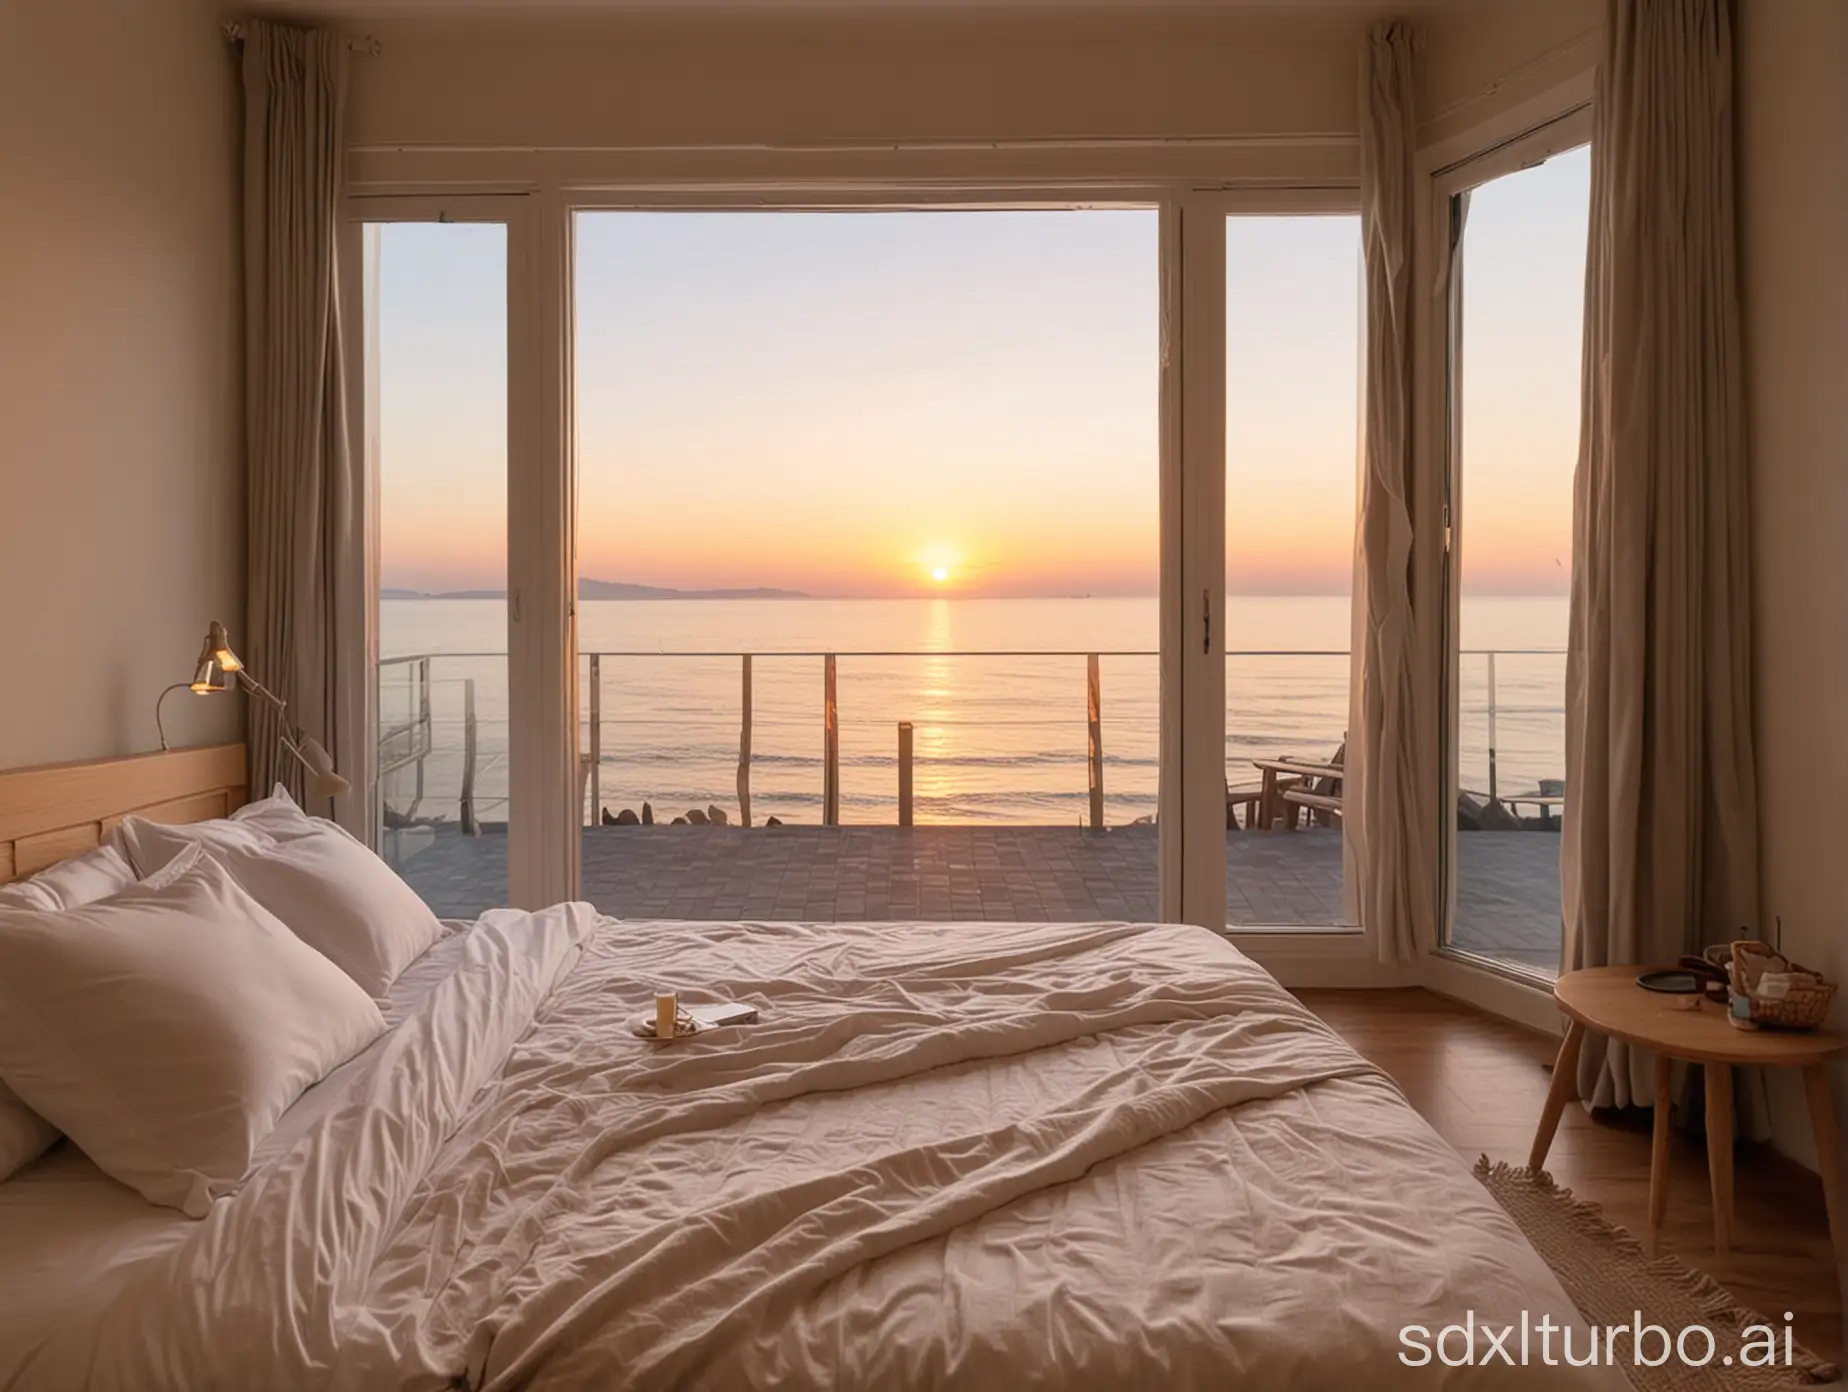 You can see the sunrise at the seaside outside the floor to ceiling window. The room is a comfortable bed with a warm and romantic atmosphere,and there is a leisure table on the bed with snacks on it,Wide Angle，medium Angle